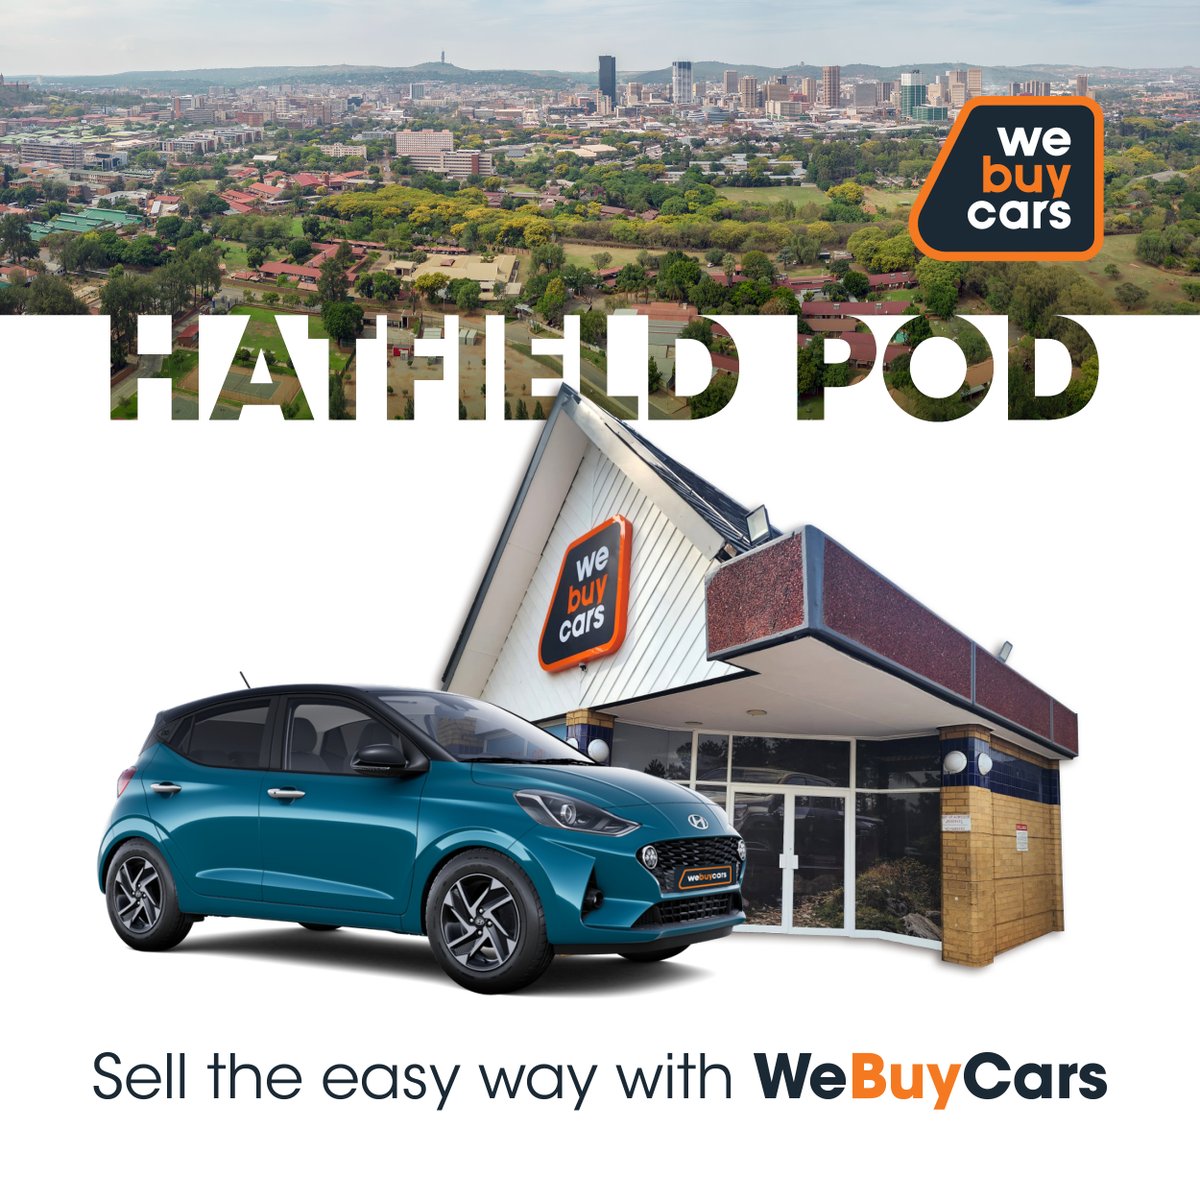 Have you been to our Hatfield Buying Pod yet? Selling your car doesn't get easier than this! 🙌 #carsforsale #preownedcars #usedcars #usedcarsforsale #carshopping #carfinance #autosales #carsales #carlifestyle #hyundaimoments